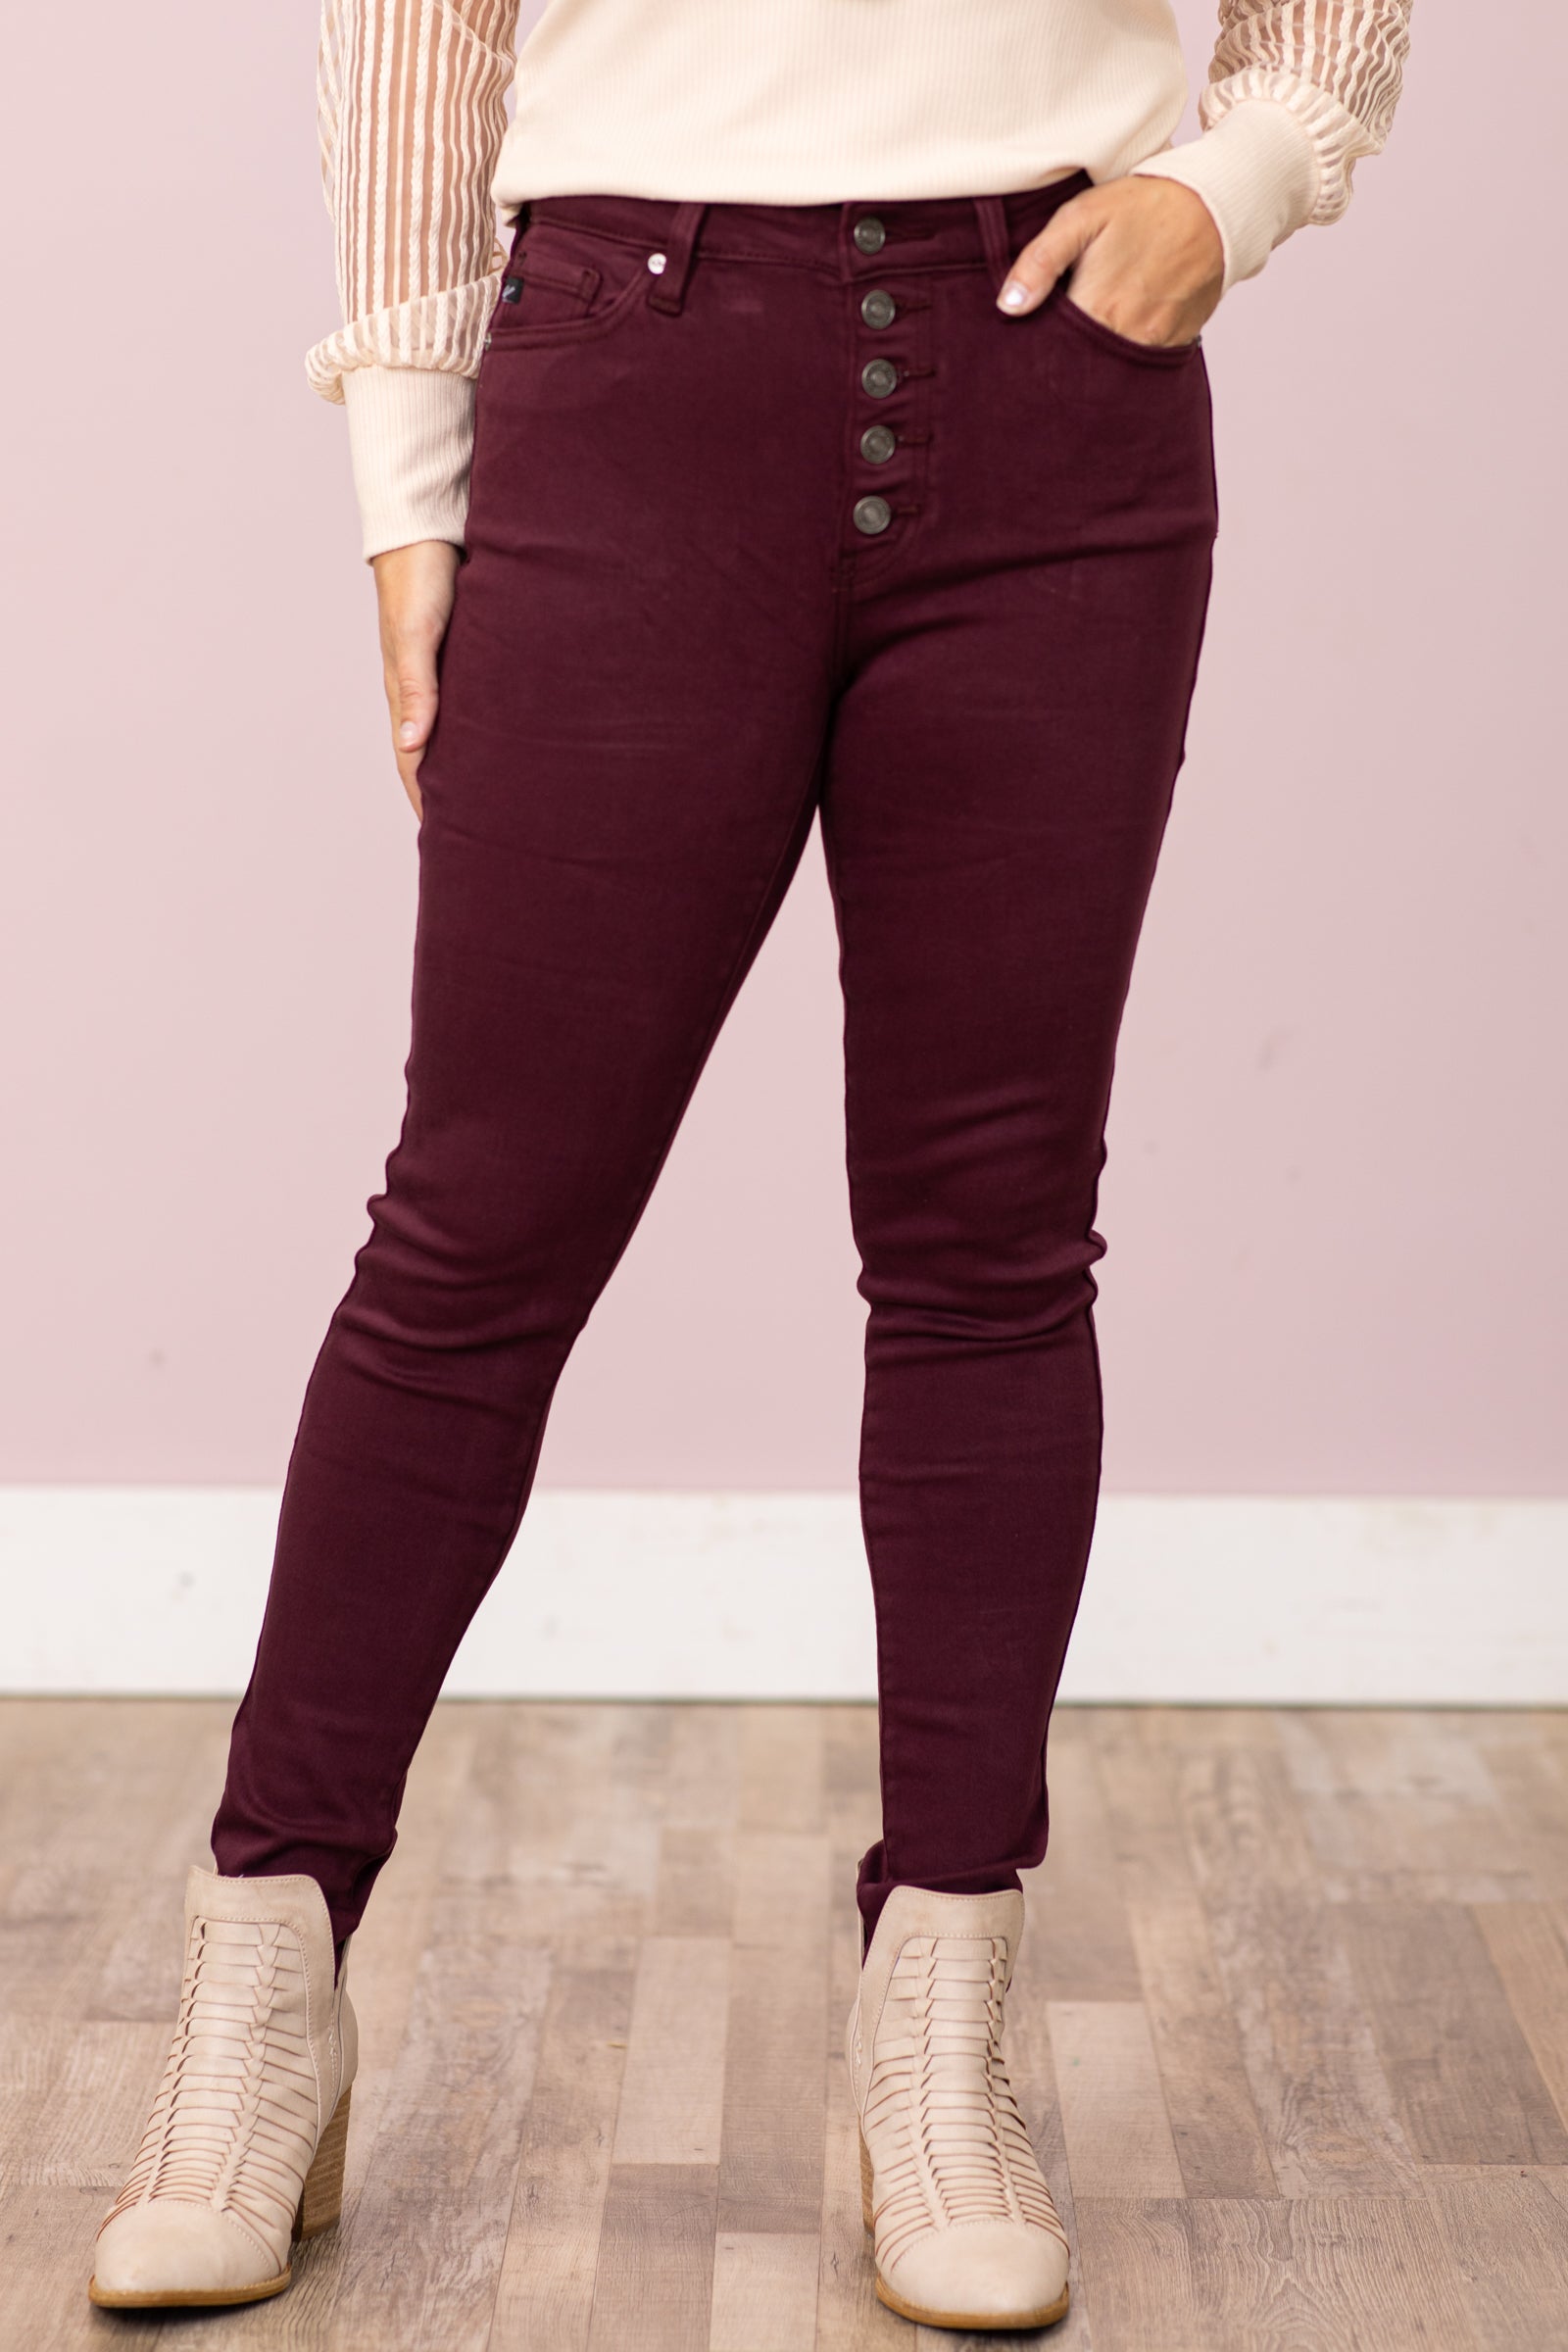 KanCan Dark Berry Button Fly Skinny Jeans